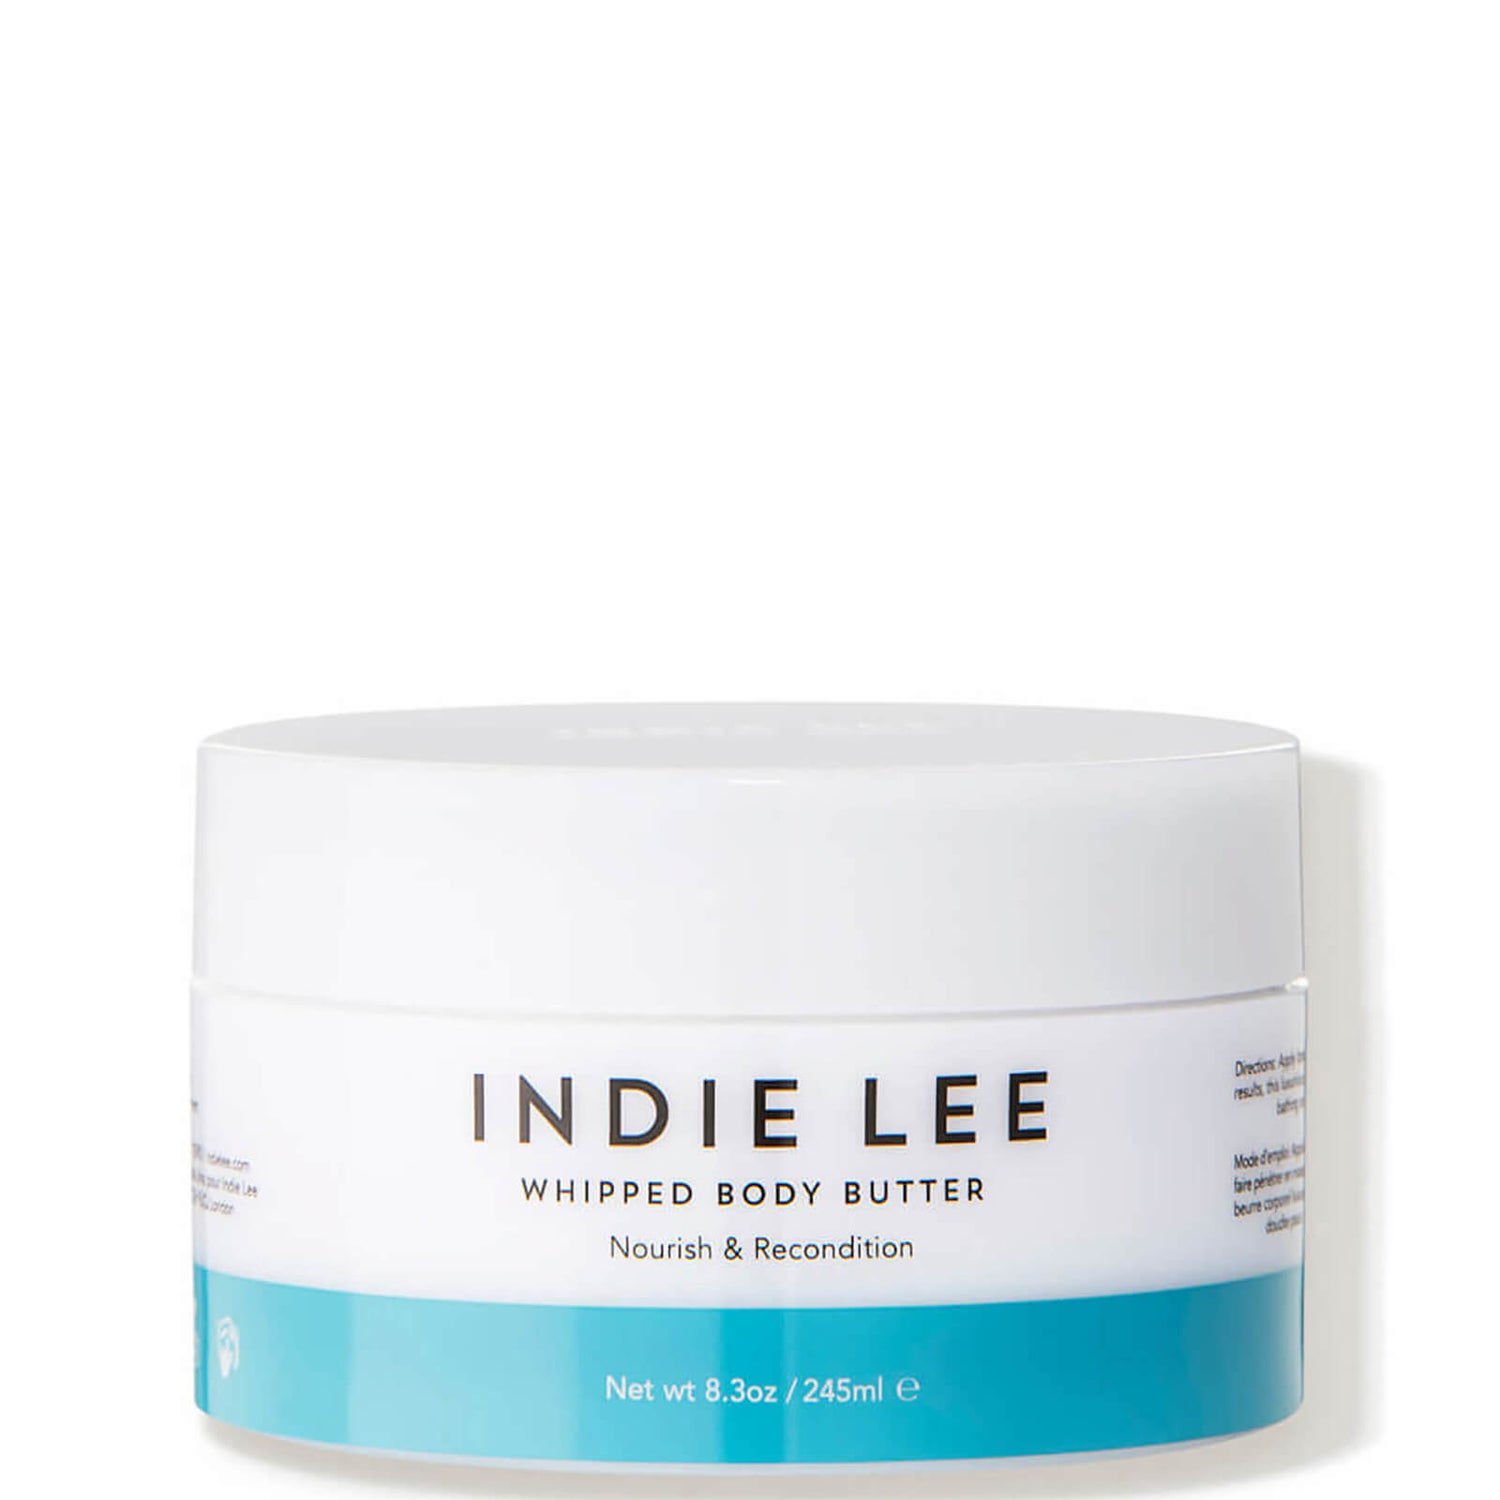 Indie Lee Whipped Body Butter 8.3 oz.